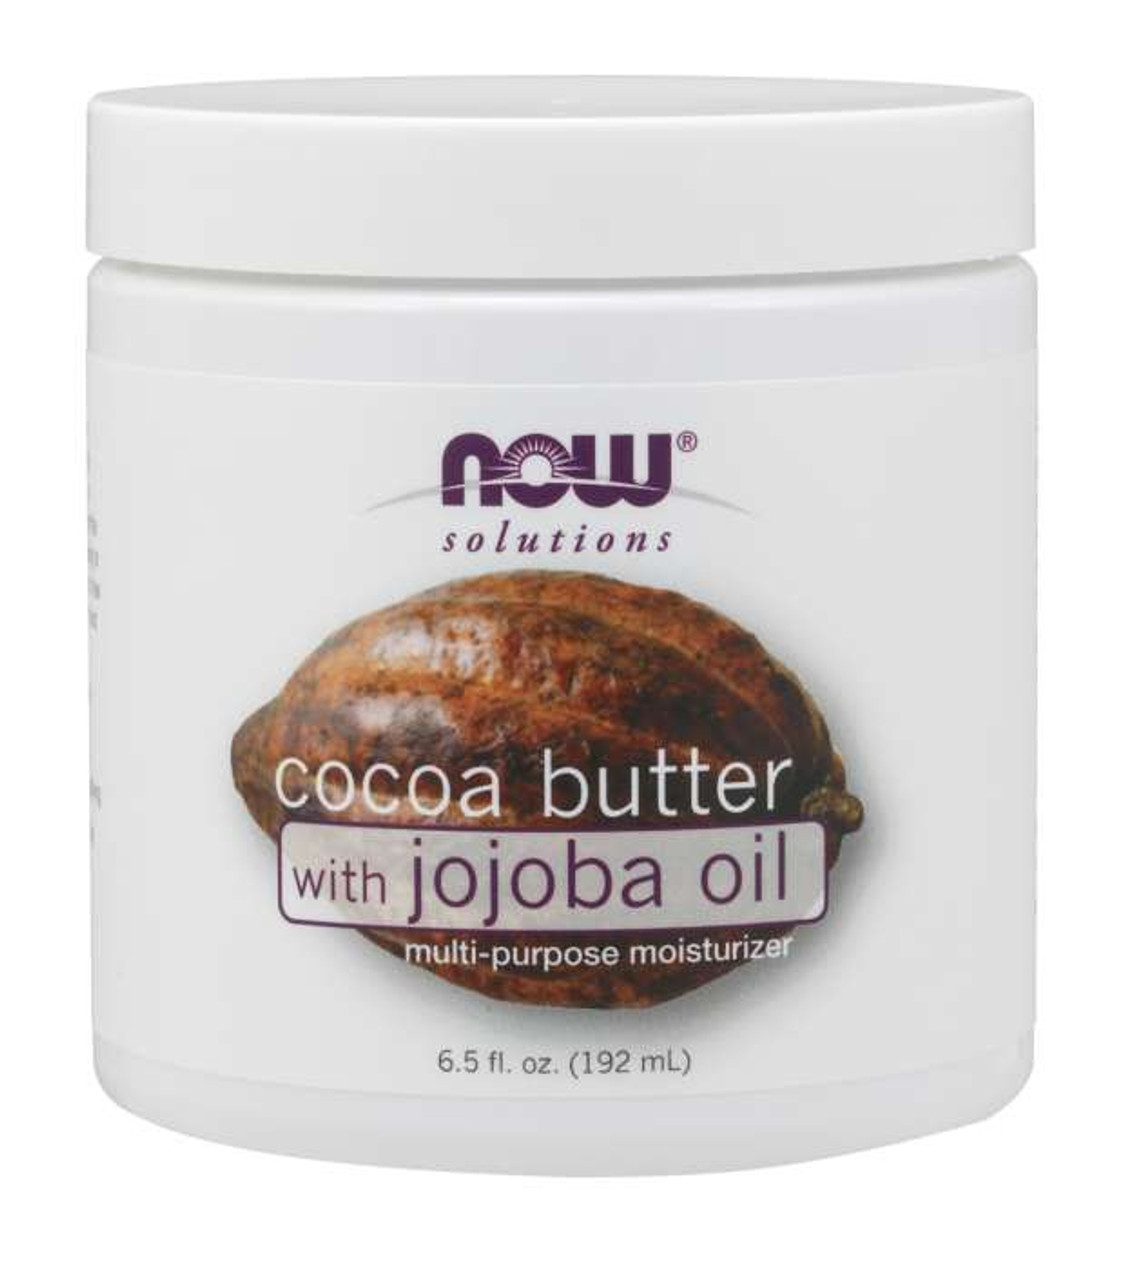 NOW® Solutions Cocoa Butter with Jojoba Oil - 6.5 fl. oz.